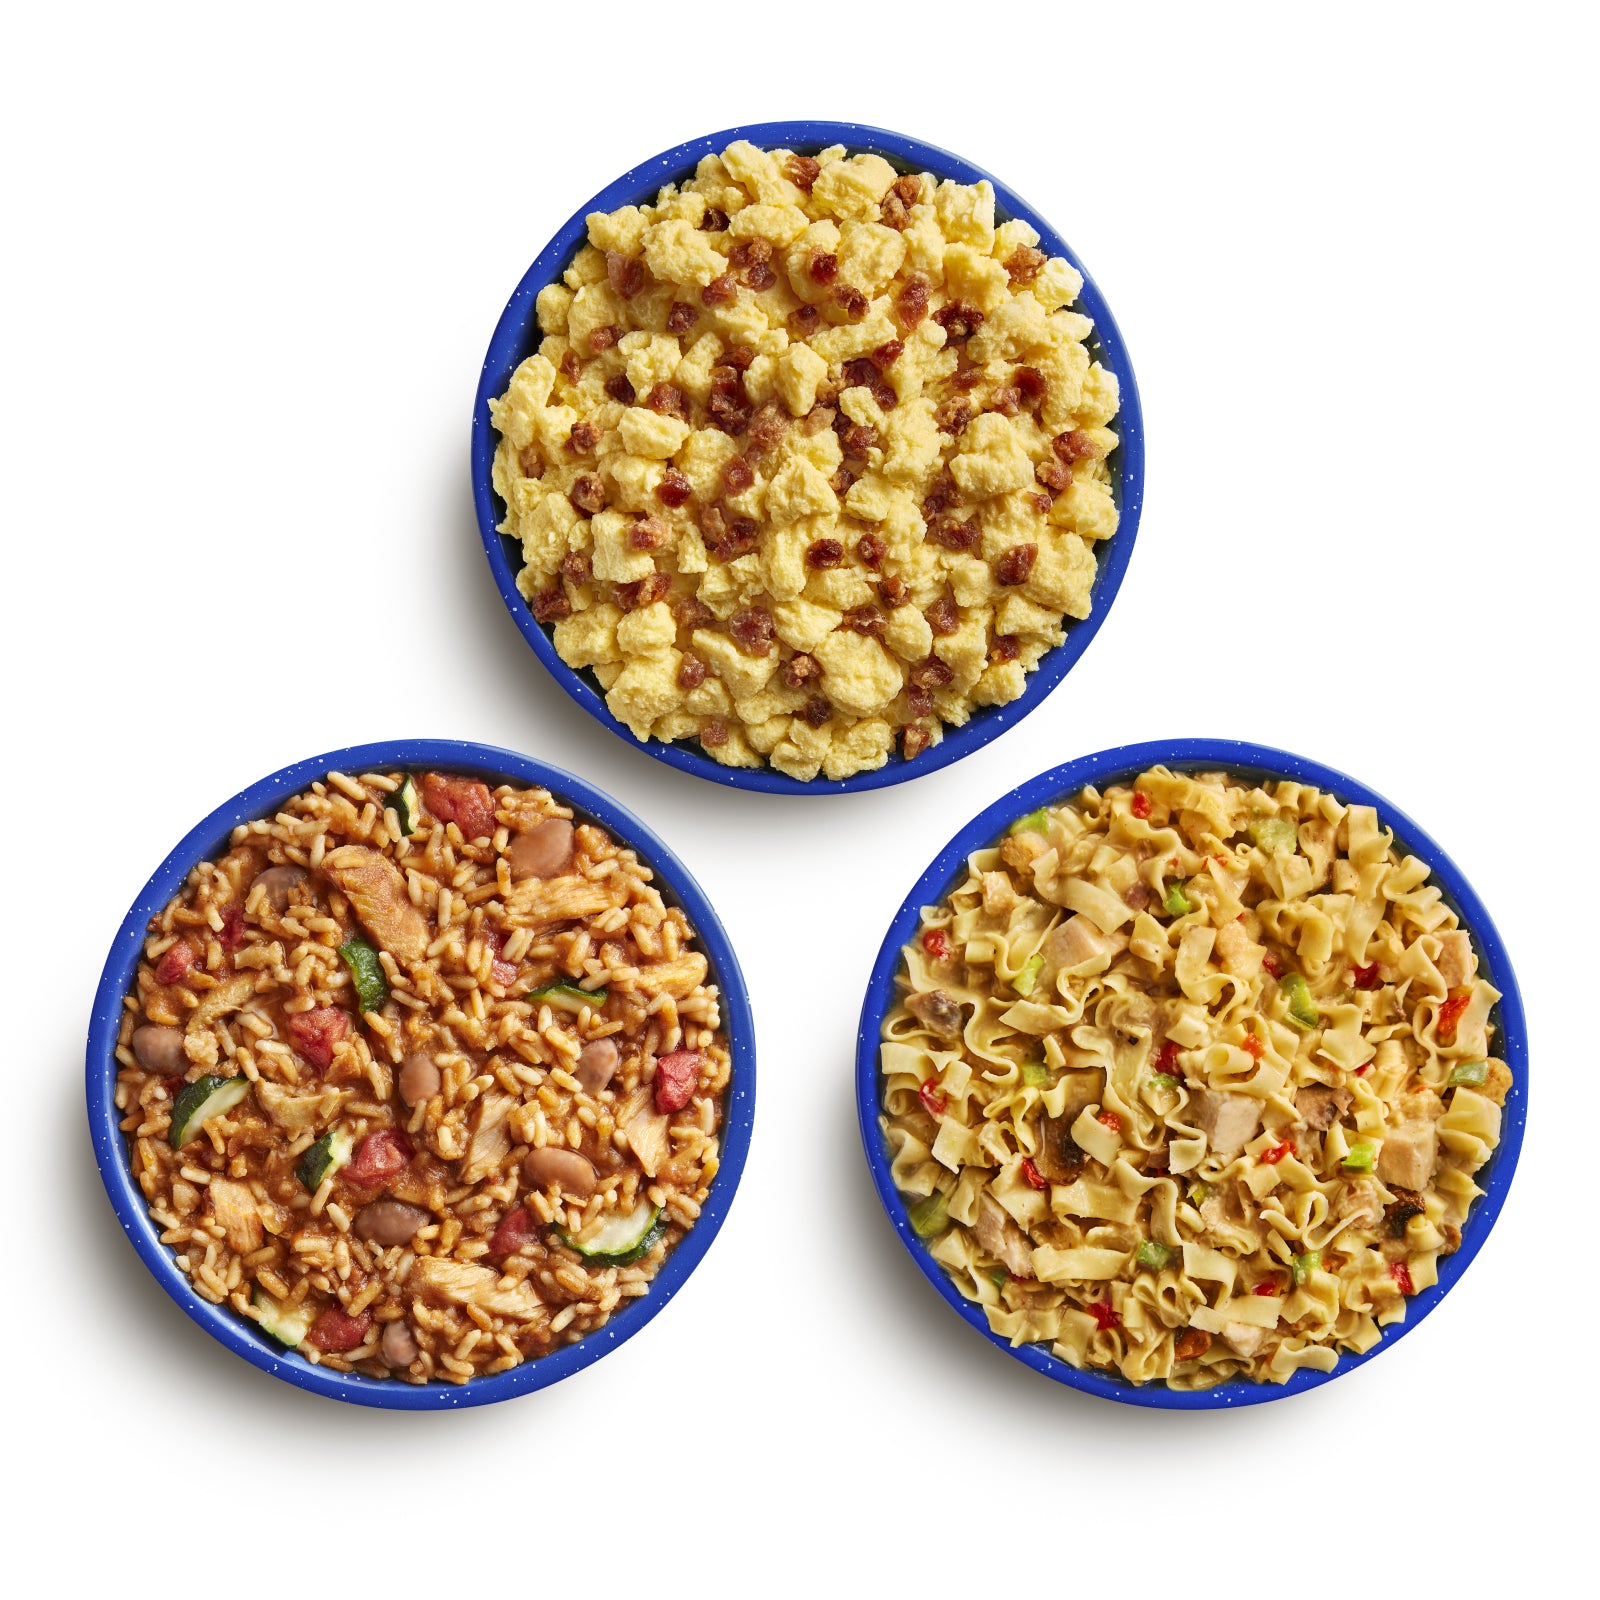 0087605 Backcountry Adventure Kit prepared meals: Chicken & Rice, Homestyle Chicken Noodle Casserole and Scrambled Eggs with Uncured Bacon.